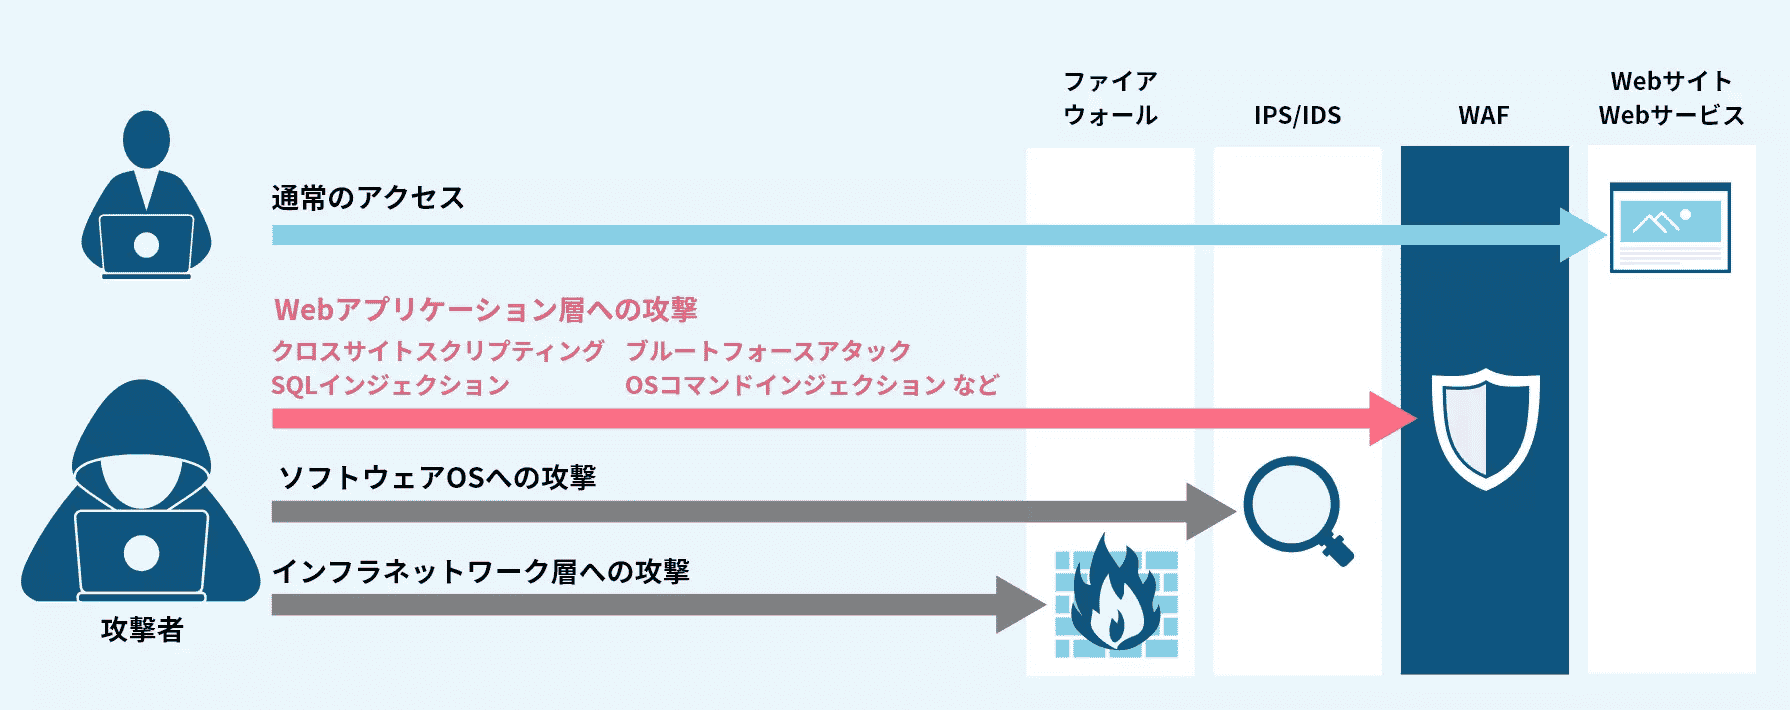 IDSとIPSの違いとは？Difference-between-IDS-and-IPS